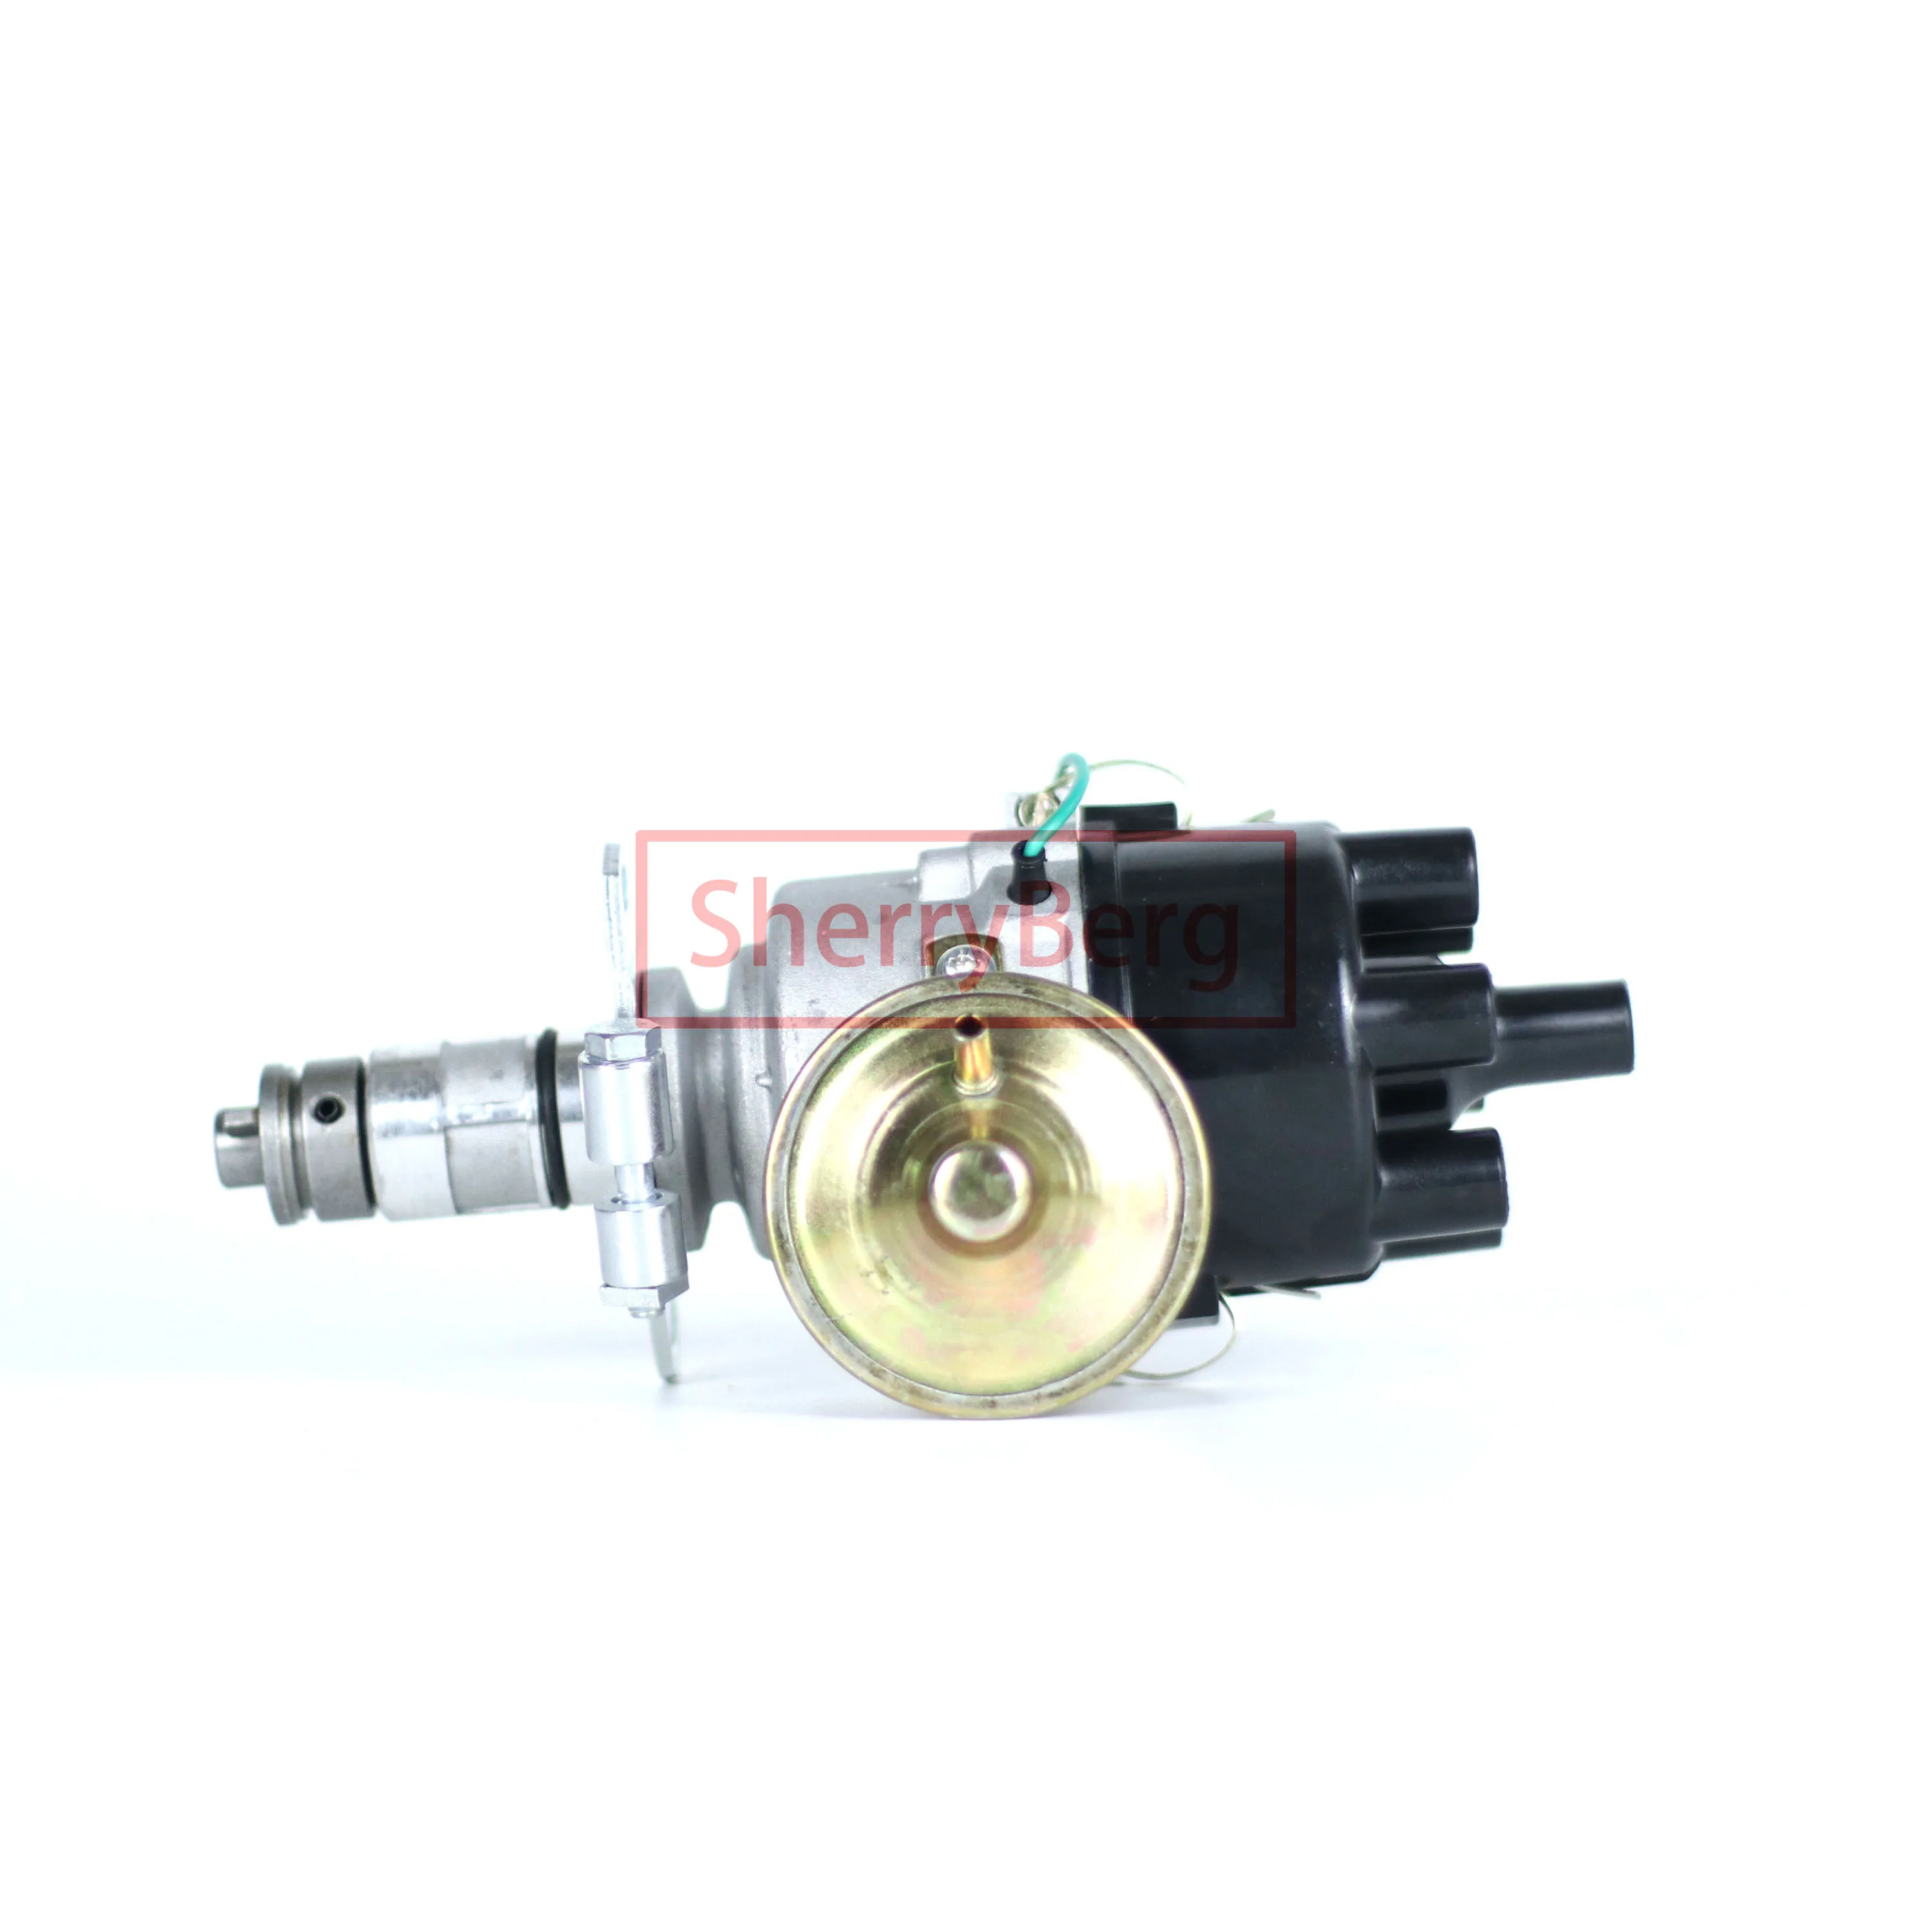 

SherryBerg New Point Distributor for Daimler 420 1963 1964 1965 1966 1967 1968-1970 IGNITION (Rep. Lucas 45D6 Type) 45D 6 Cyls